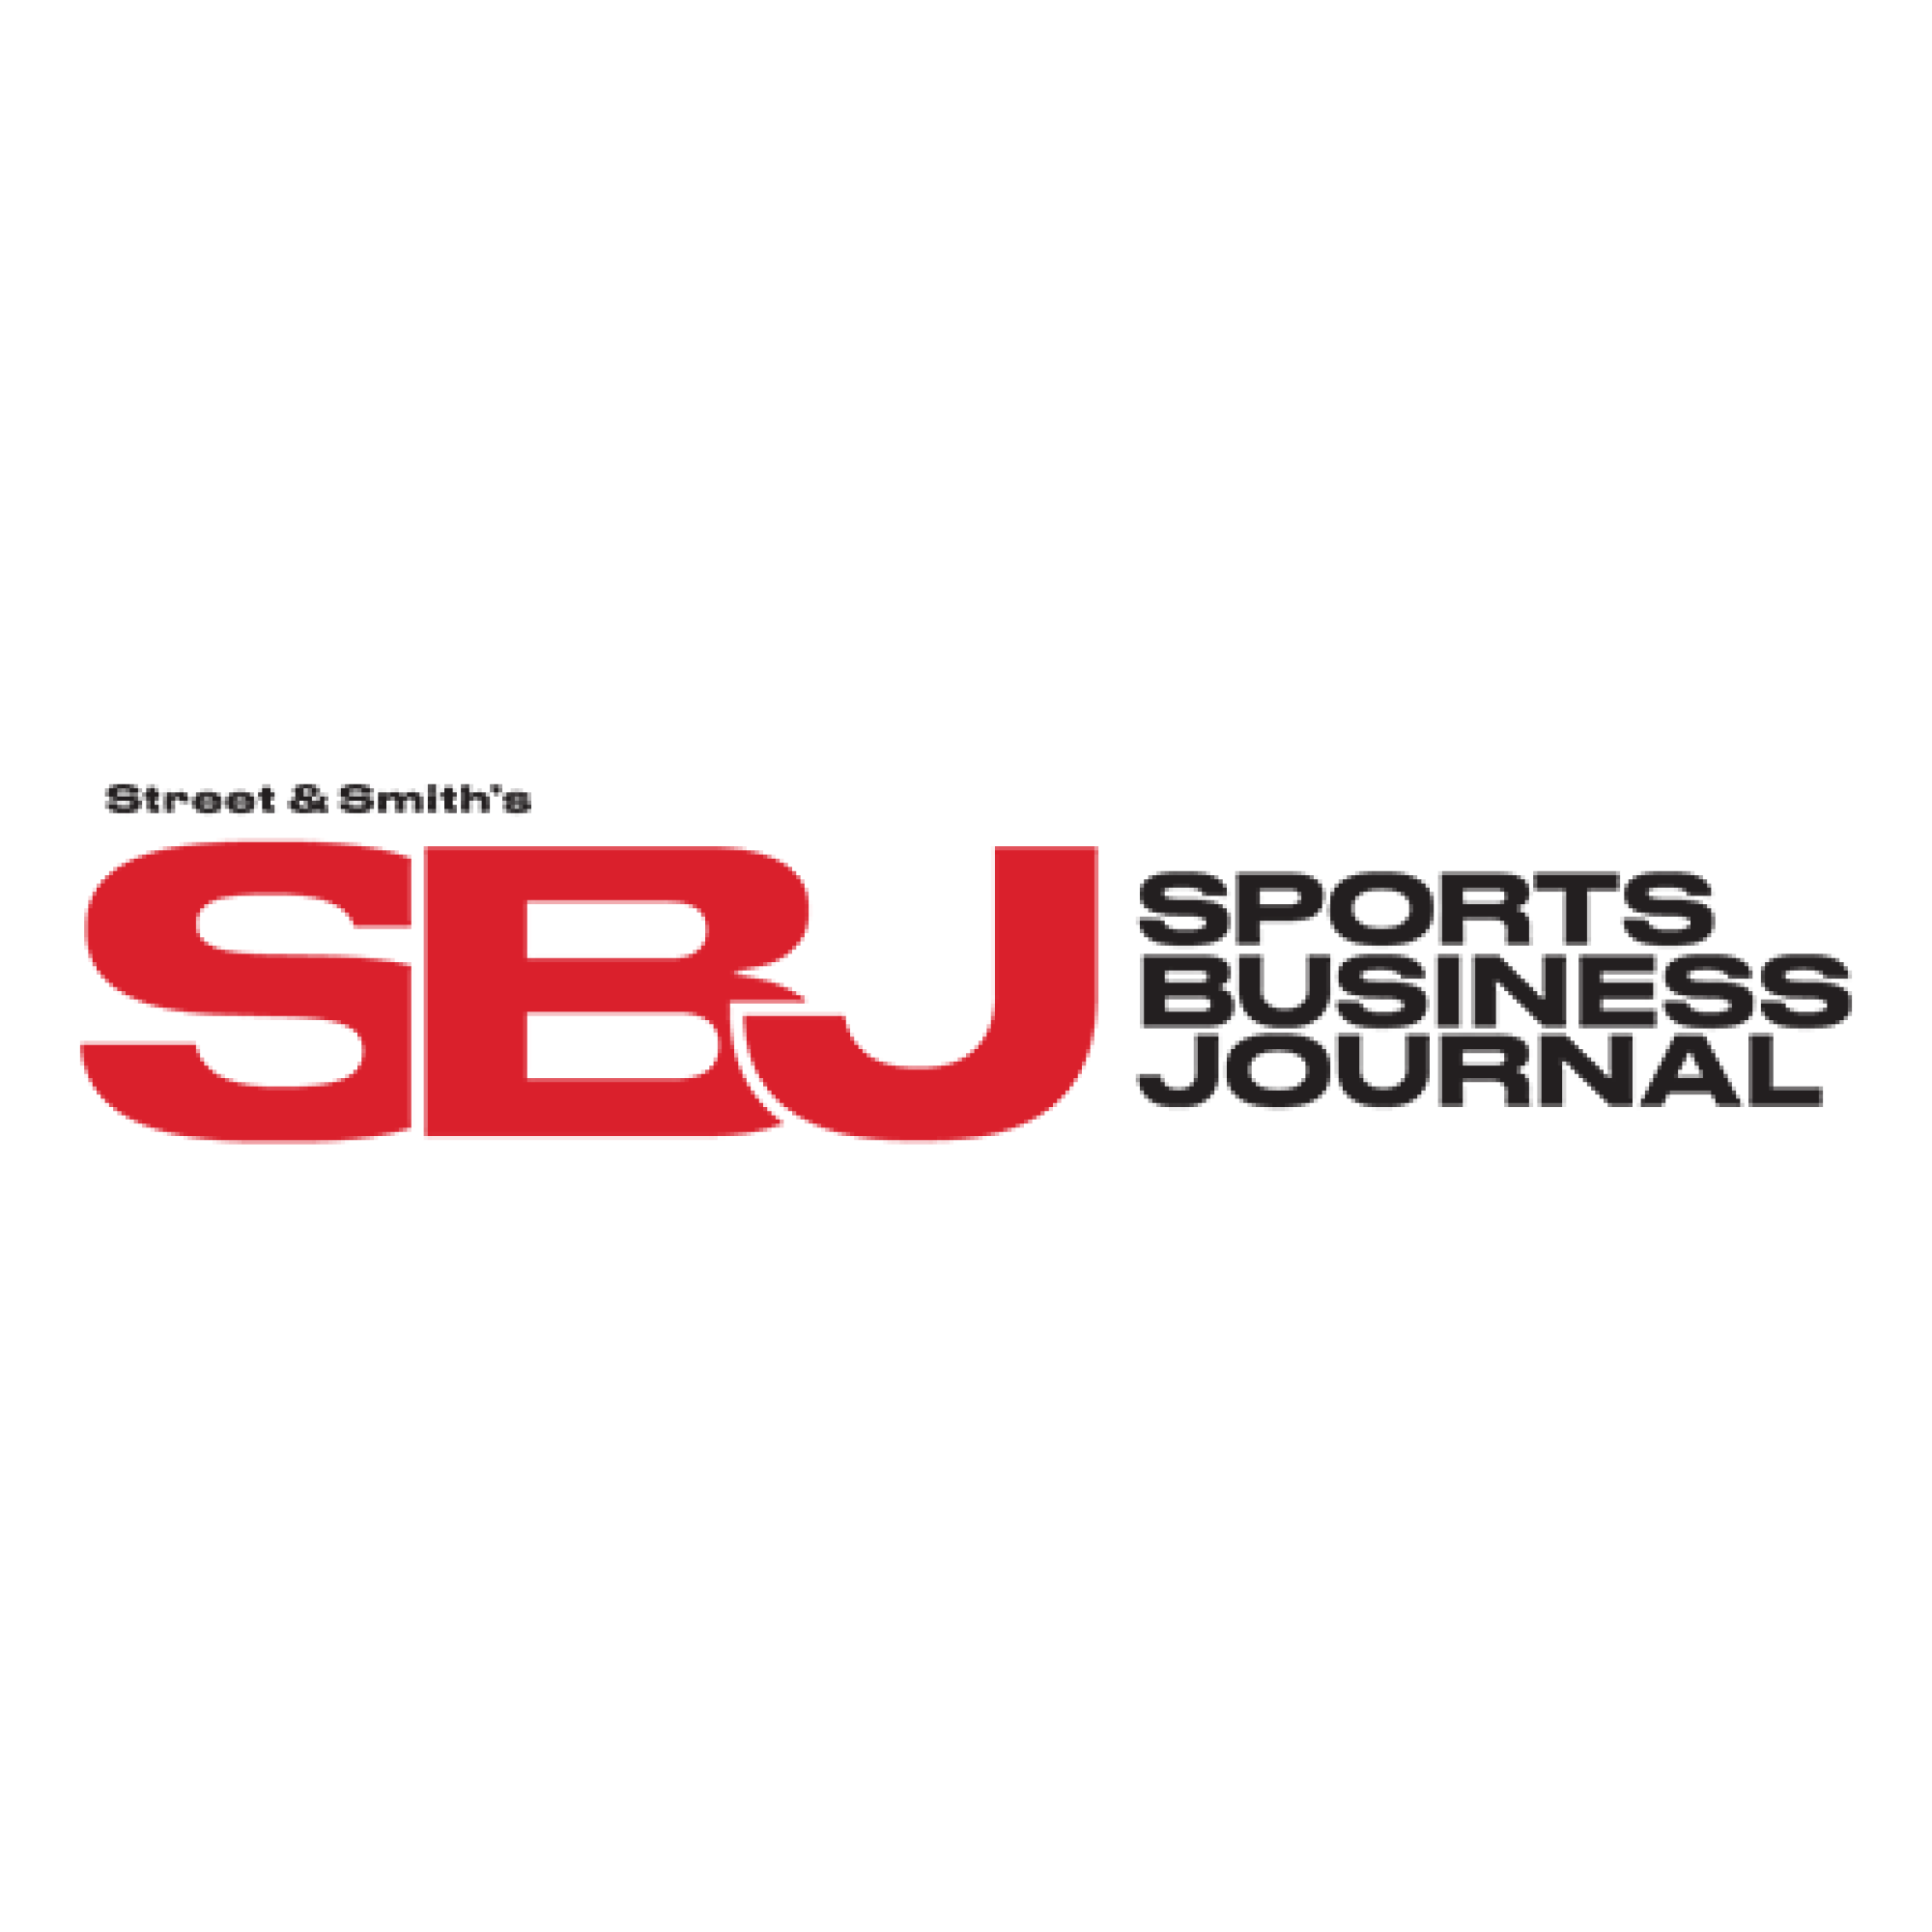 FEATURED ON SPORTS BUSINESS JOURNAL